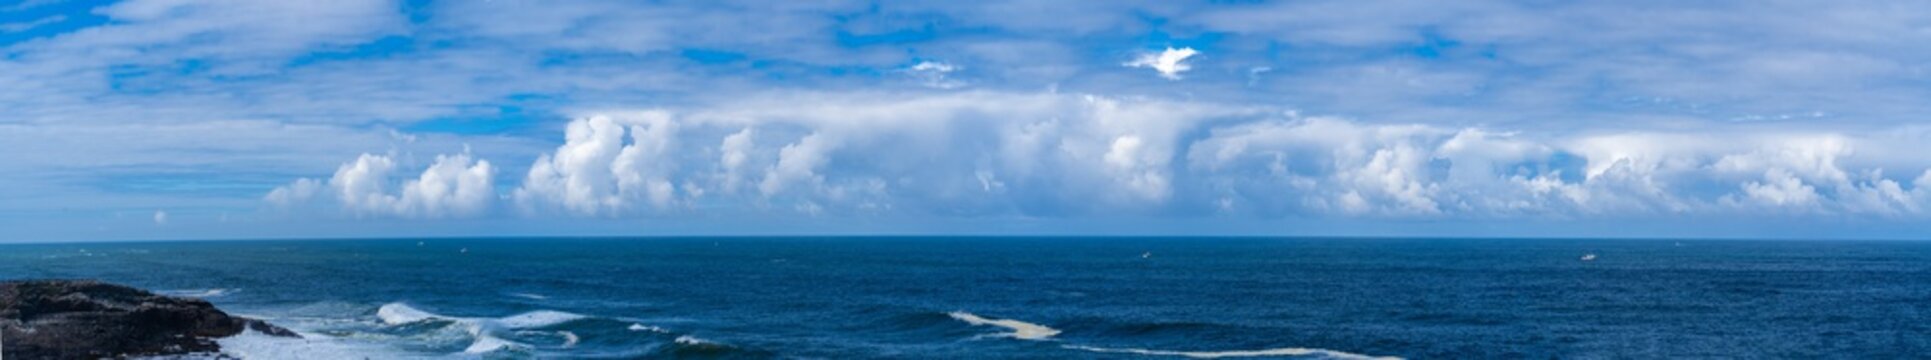 A panoramic image of Beautiful white cloud formations above the Pacific ocean near Depoe Bay on the Central Oregon coast